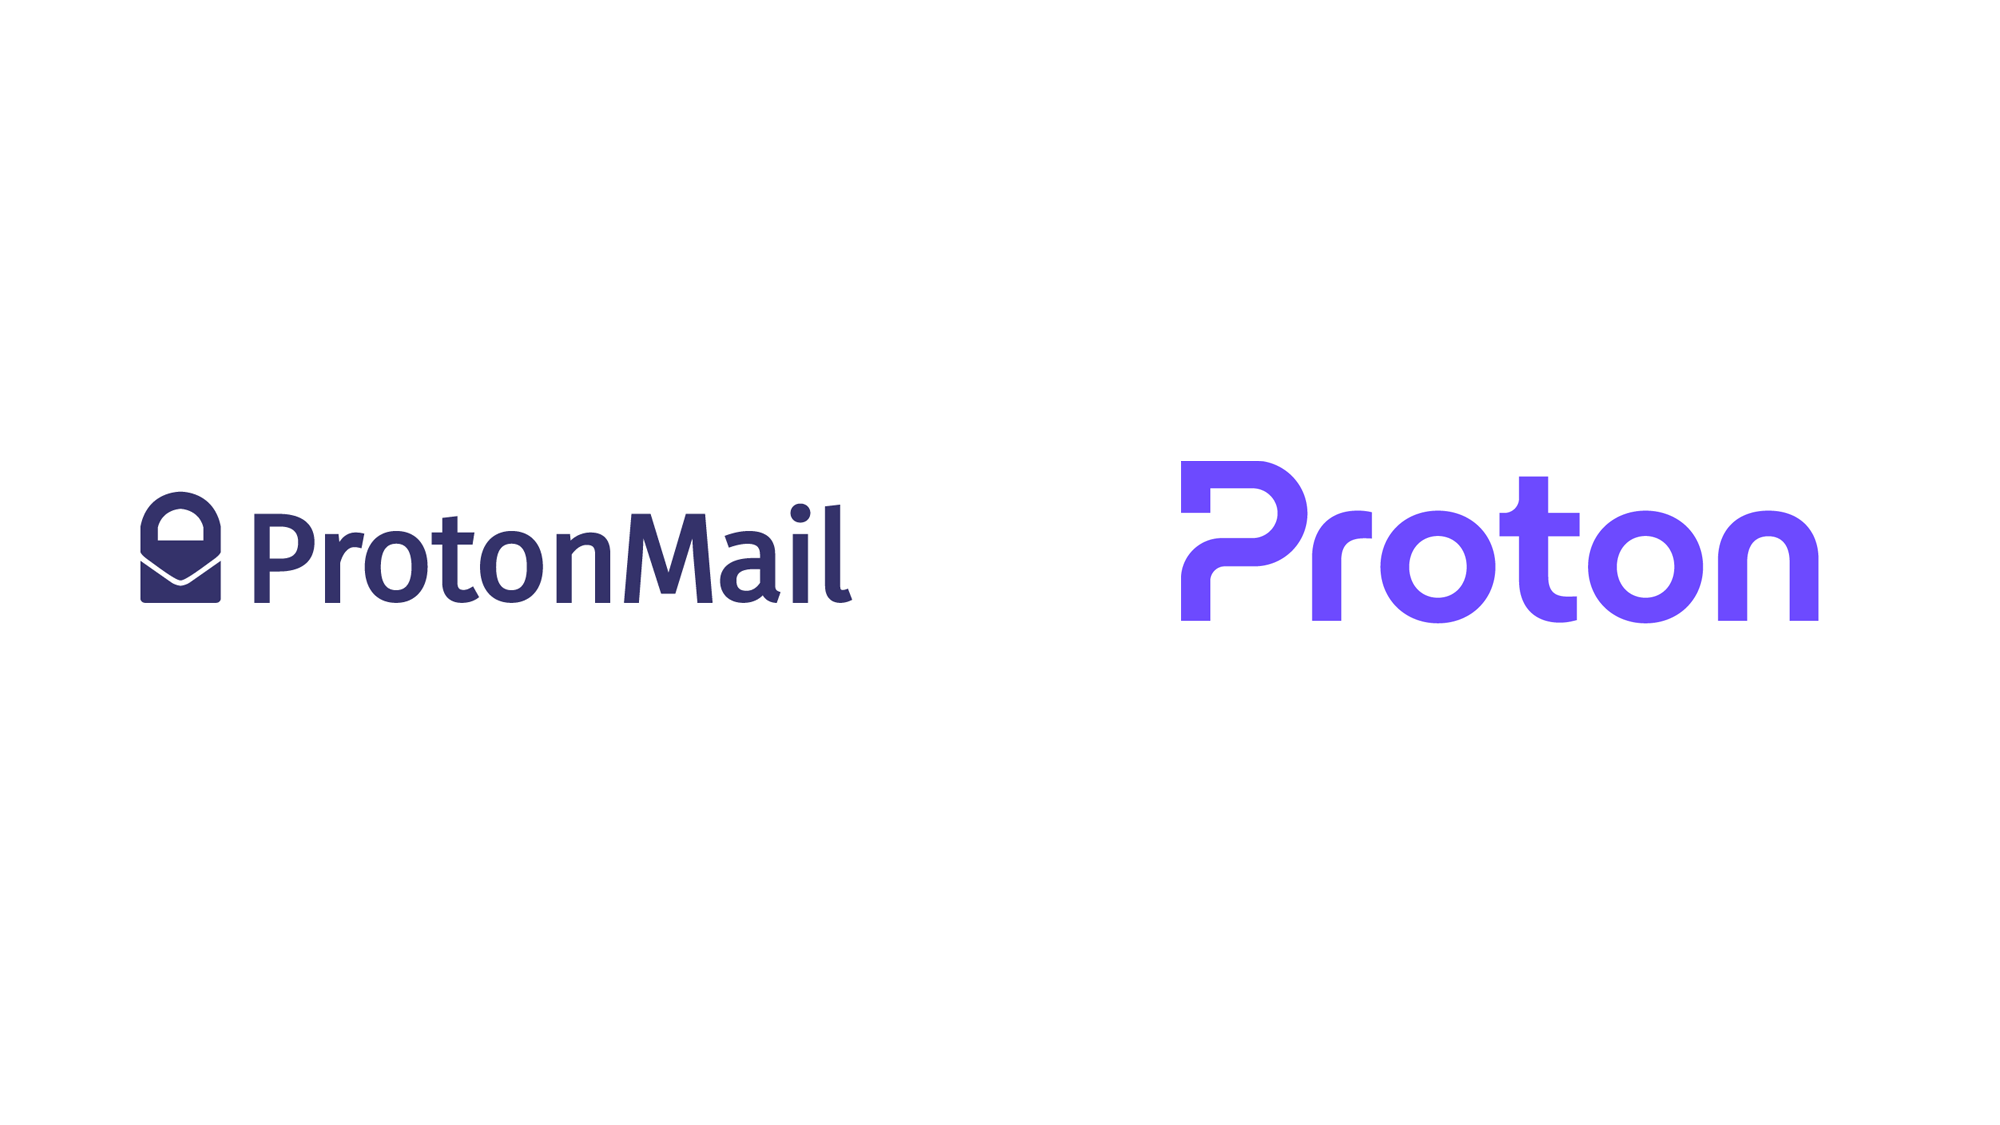 Brand New: New Logo and Icon Set for Proton done In-house